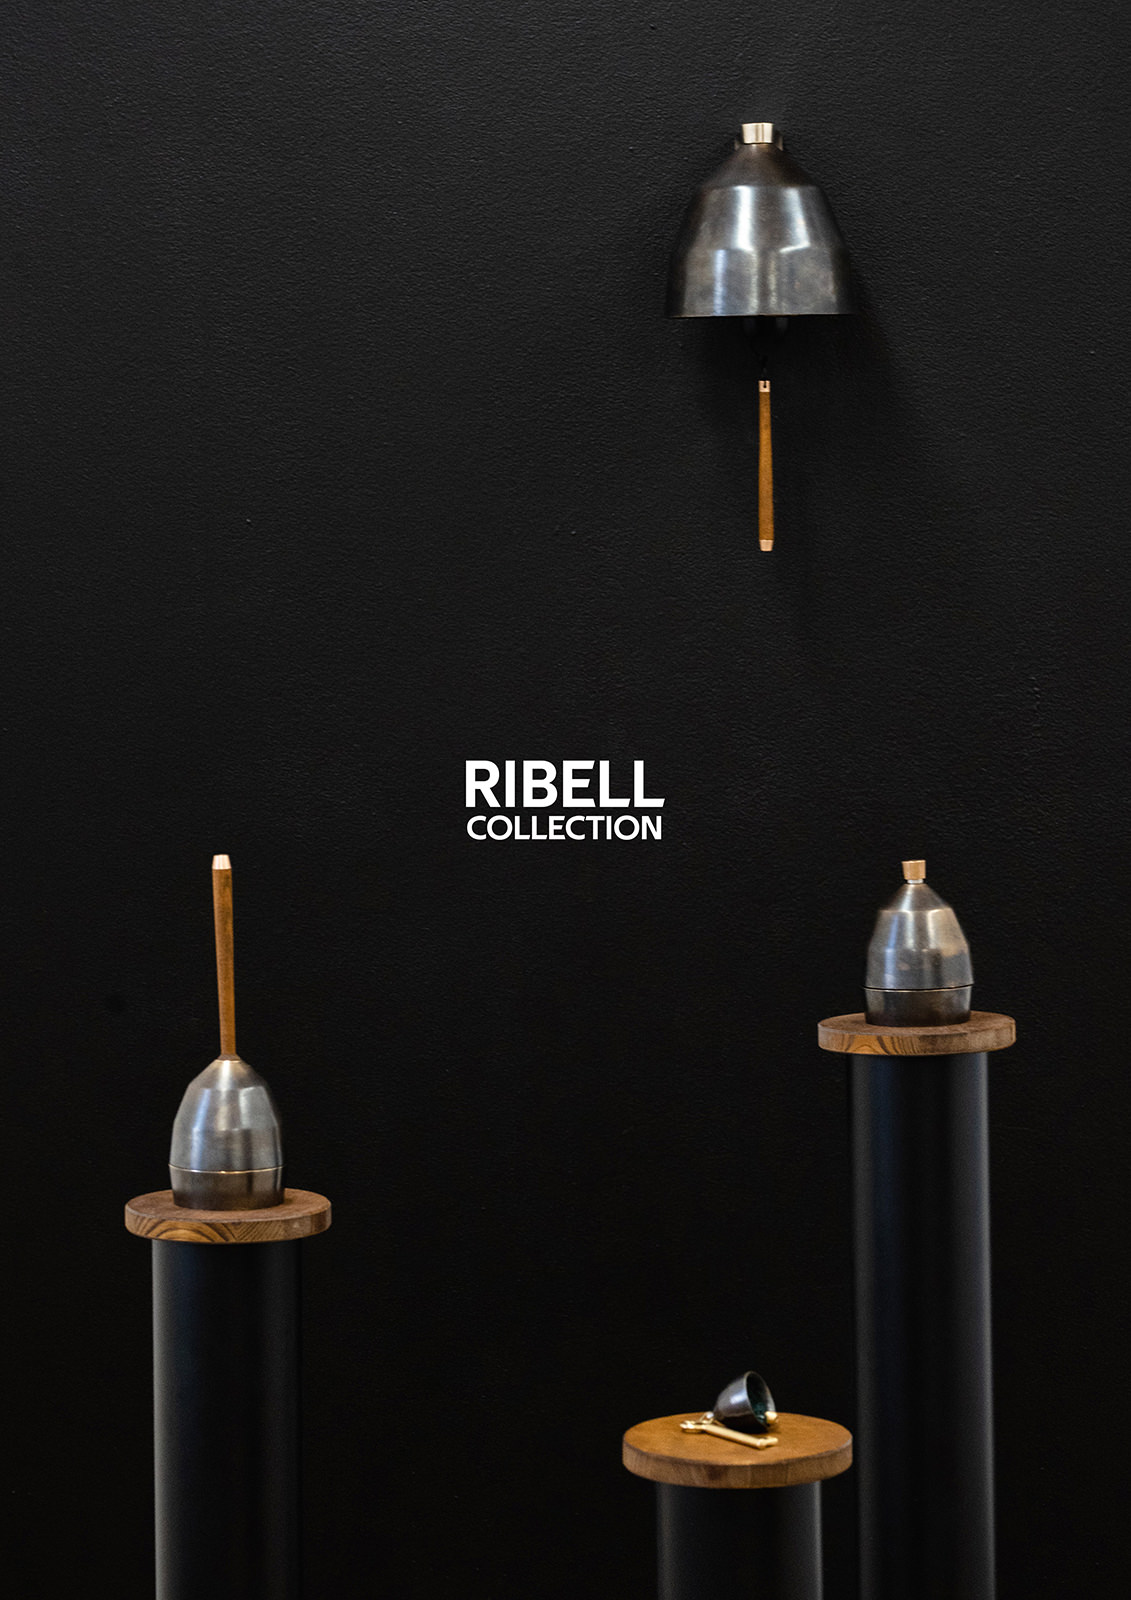 RIBELL_COLLECTION-ac078dfe